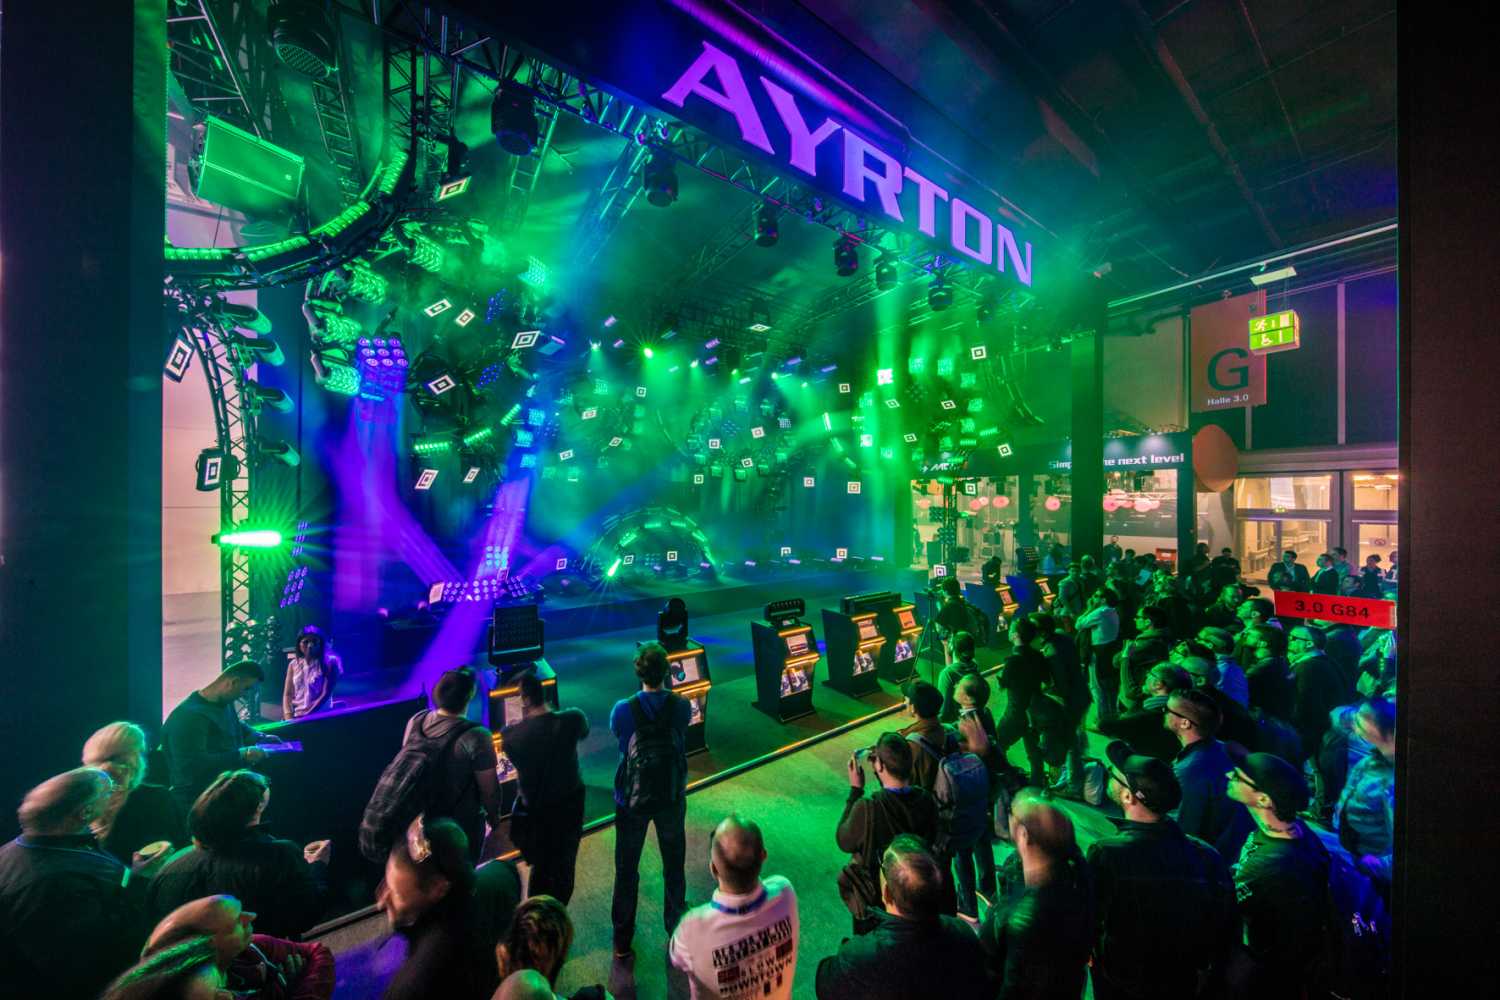 Ayrton’s light show at Prolight+Sound featured a display of 360 fixtures that included the new Merak, MagicBlade-FX and Arcaline3